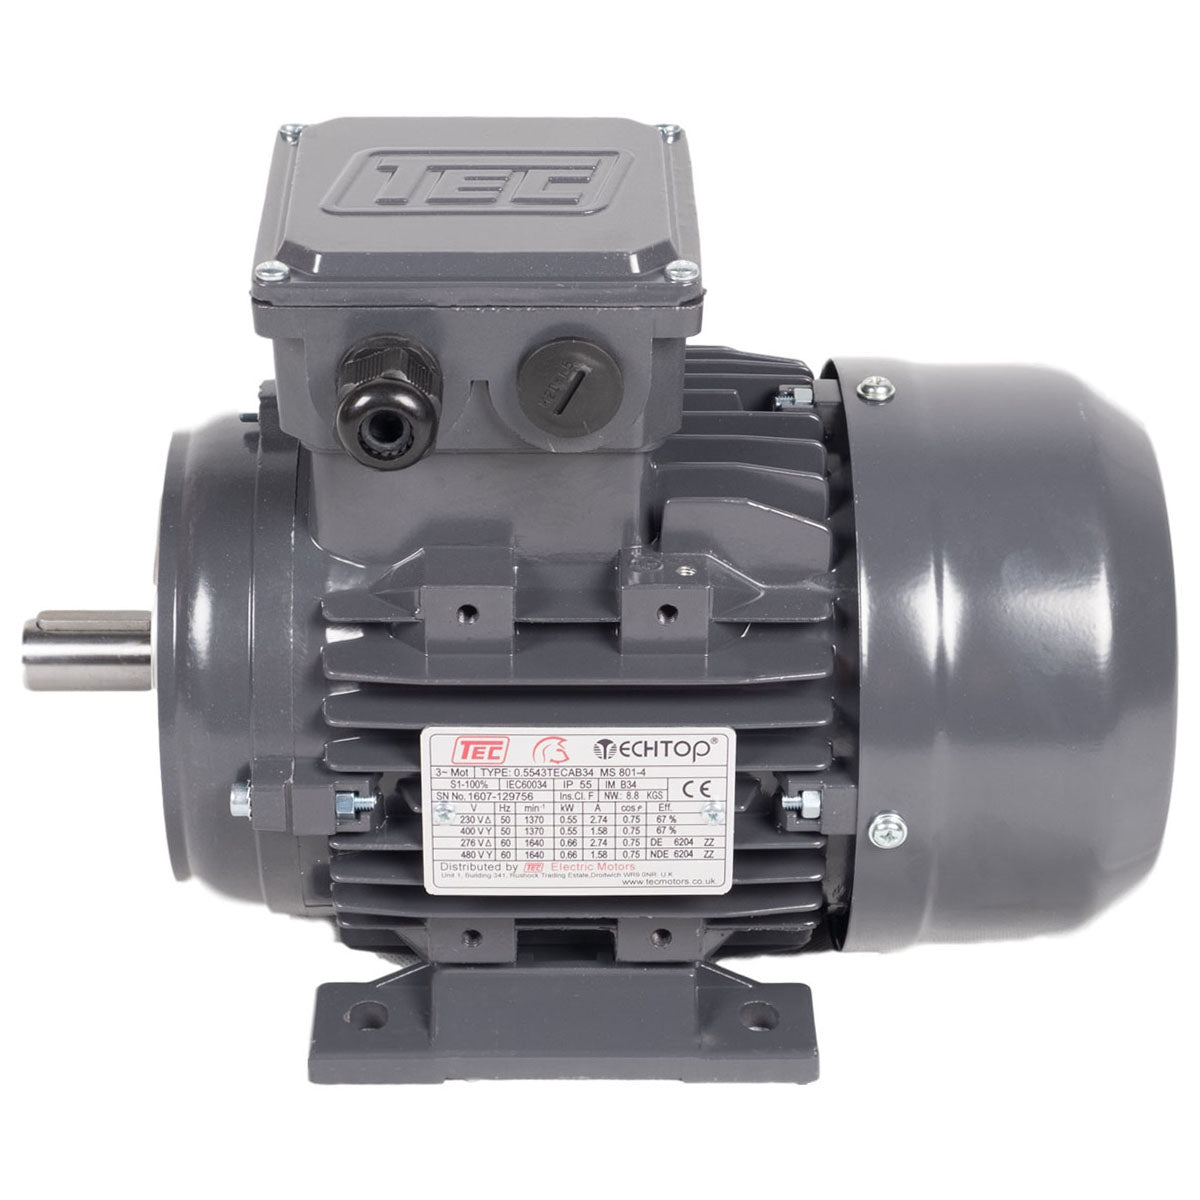 Tec 3 Phase Electric Motors 4 Pole 1500rpm Ie2 High Efficiency Approved Hydraulics Ltd 